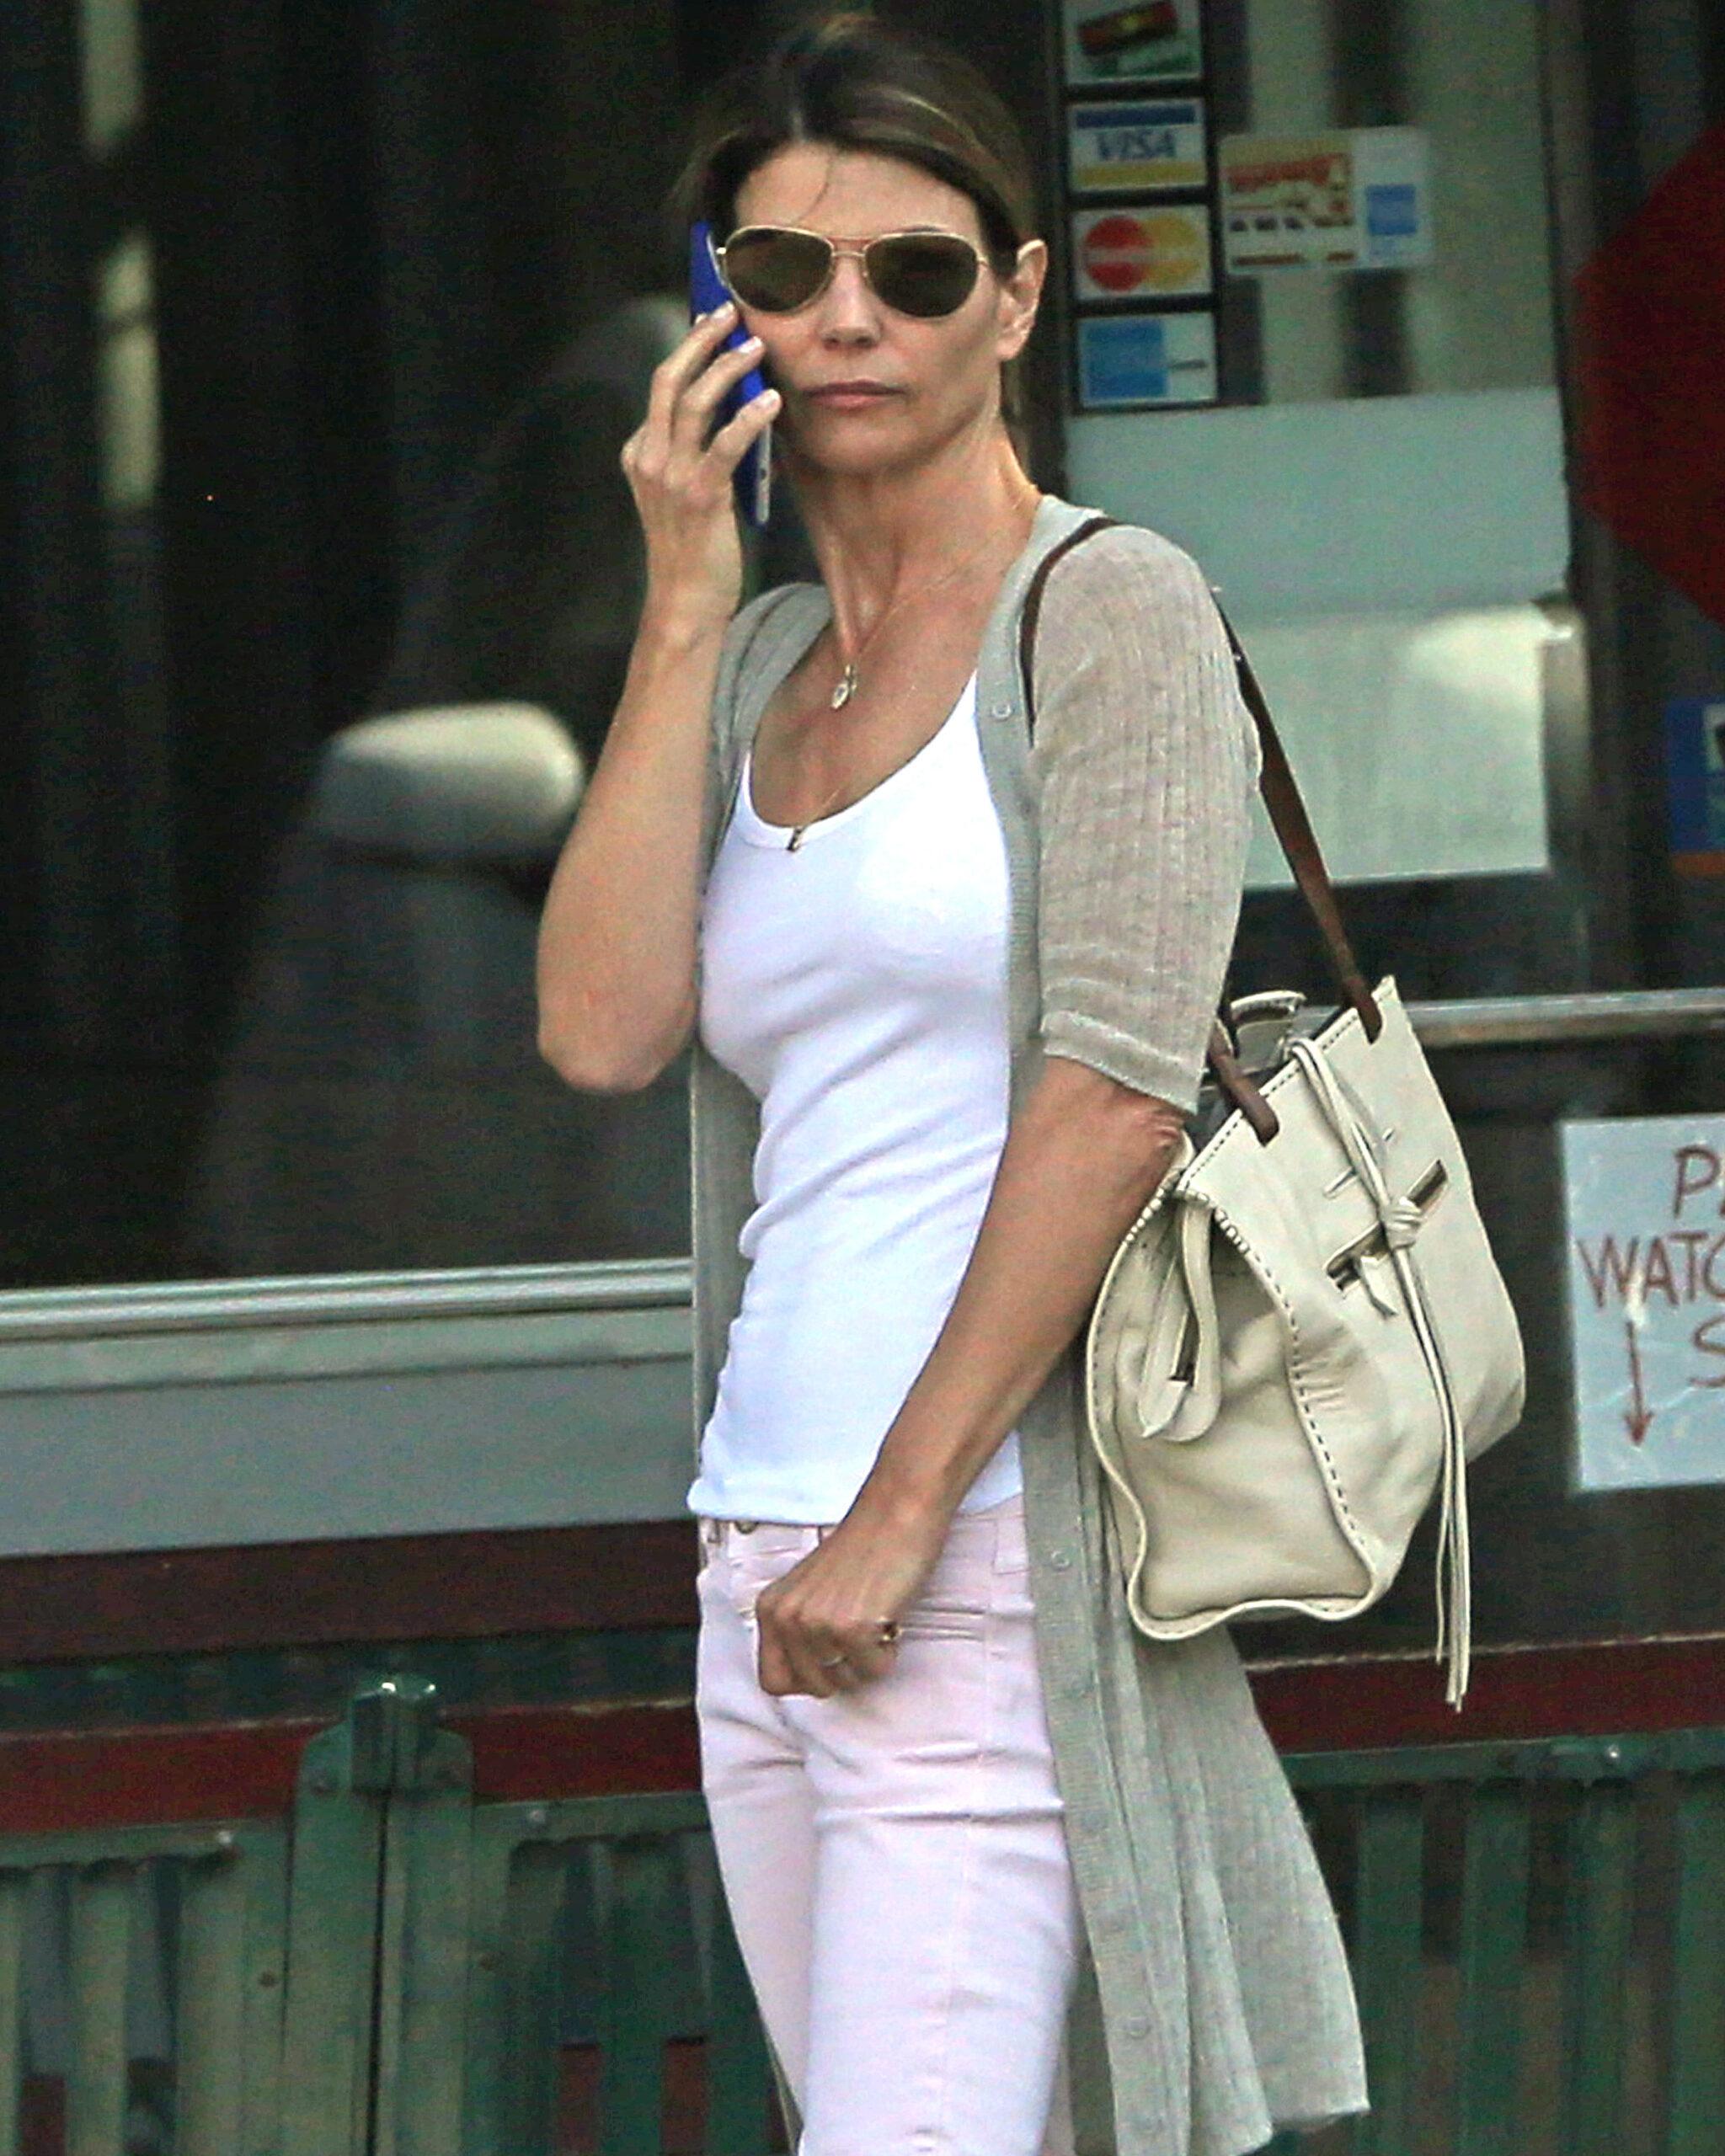 Lori Loughlin takes her car to the car wash in West Hollywood, CA